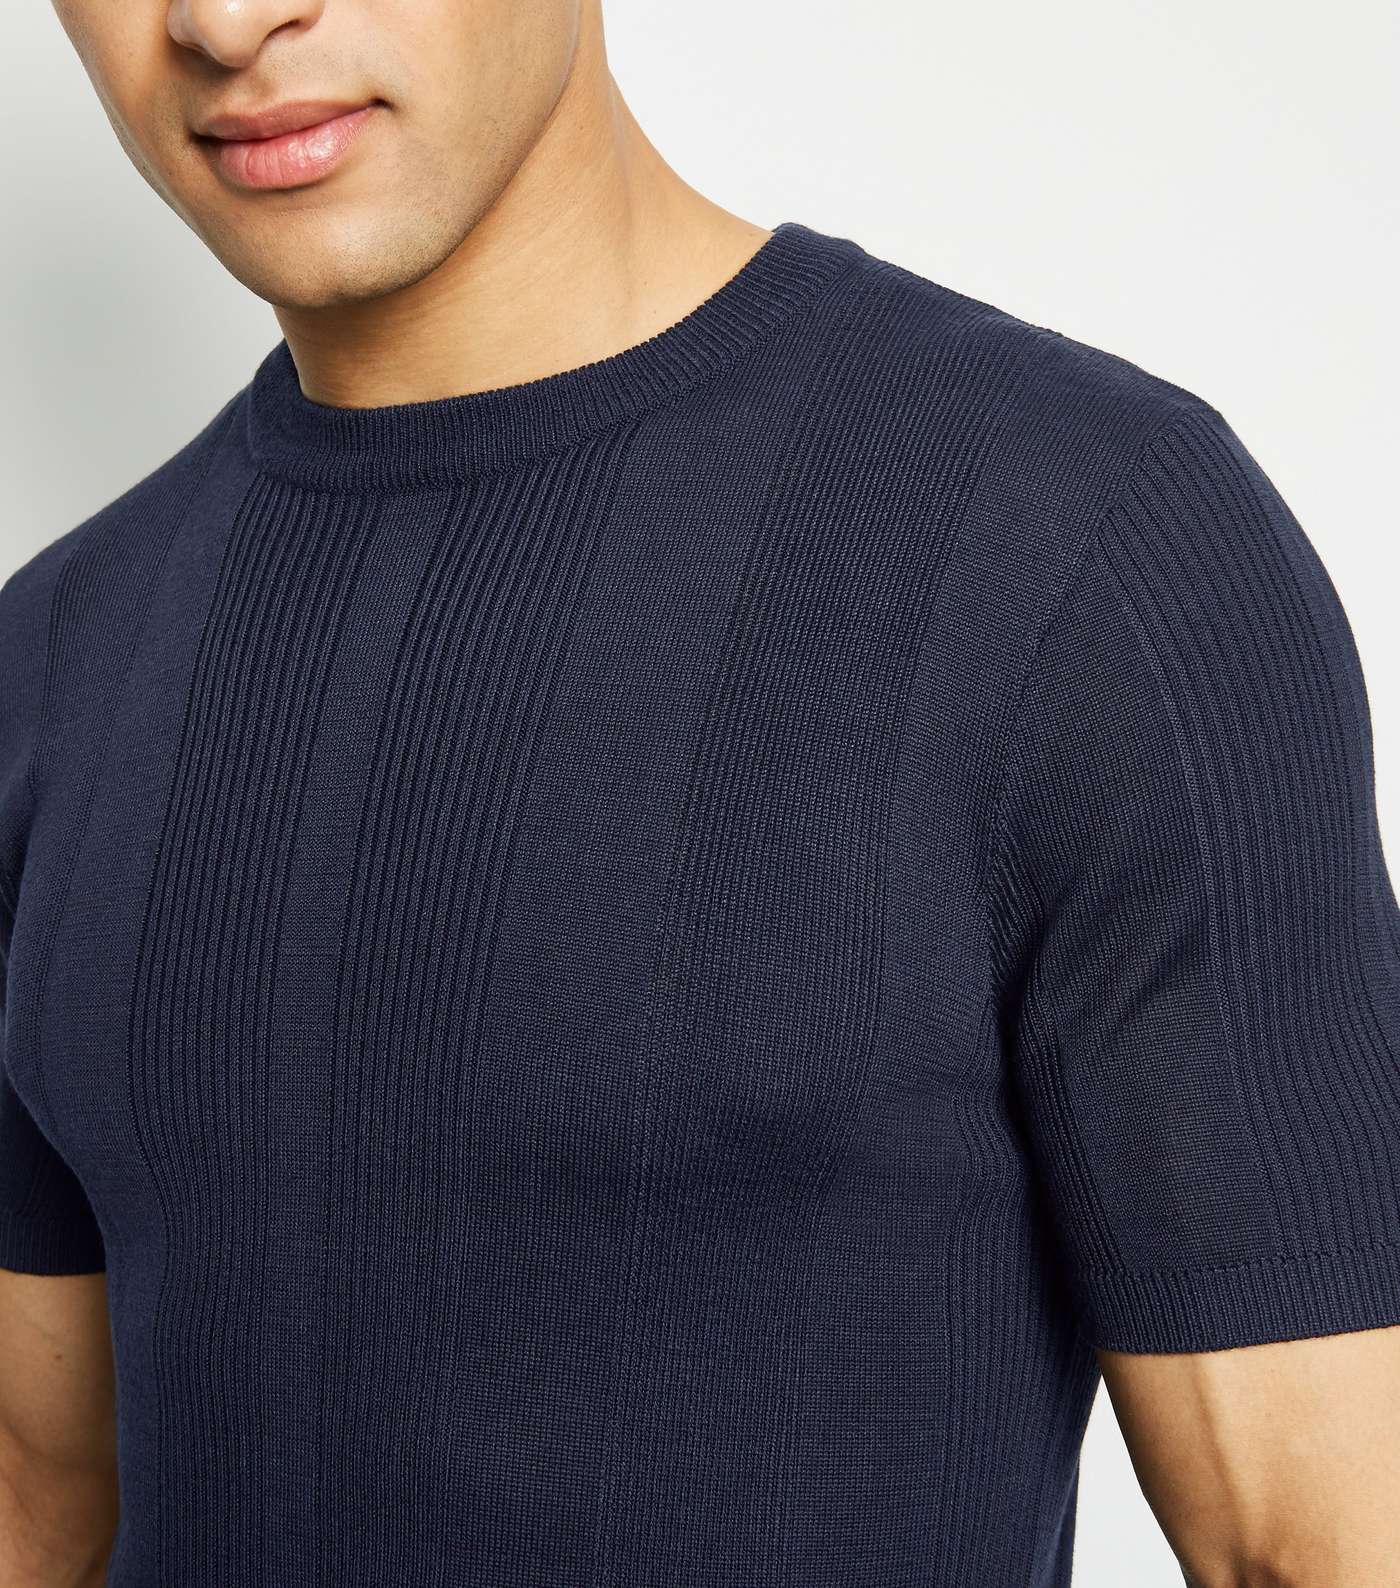 Navy Knit Short Sleeve Muscle Fit T-Shirt Image 5